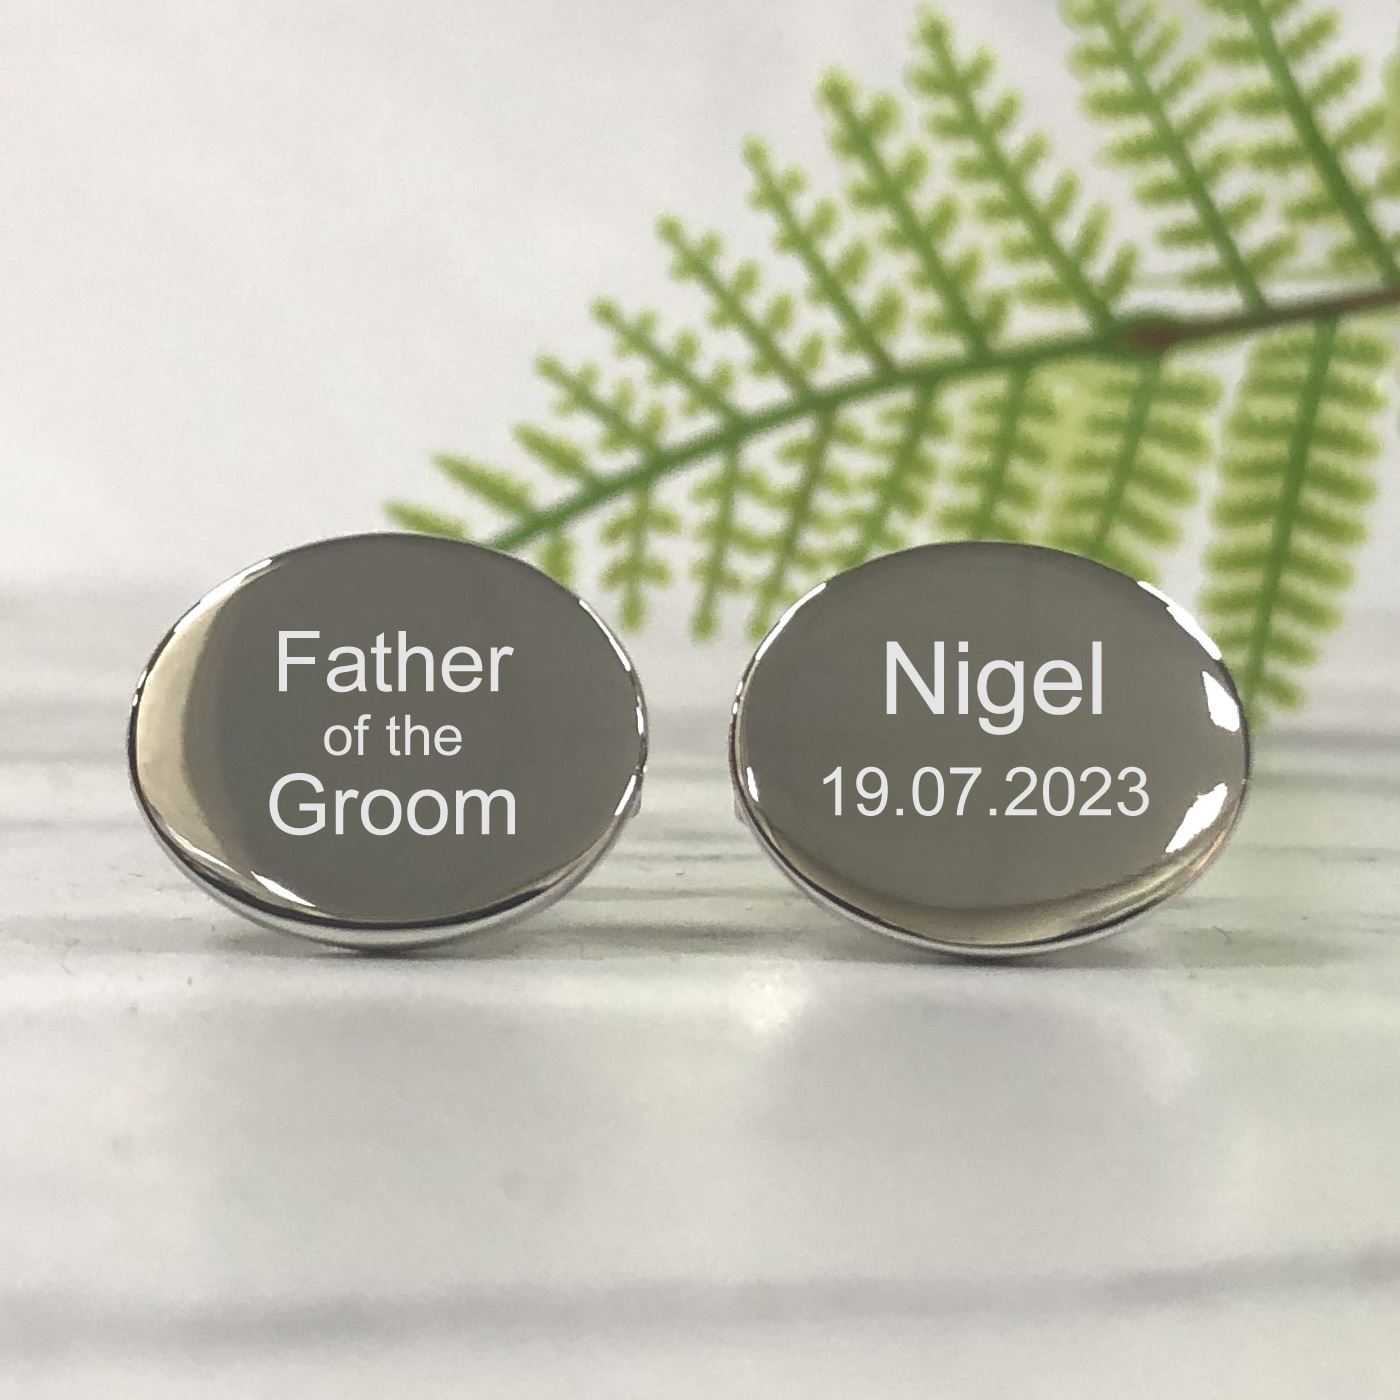 Engraved Wedding Day Oval Cufflinks - Father of the Groom